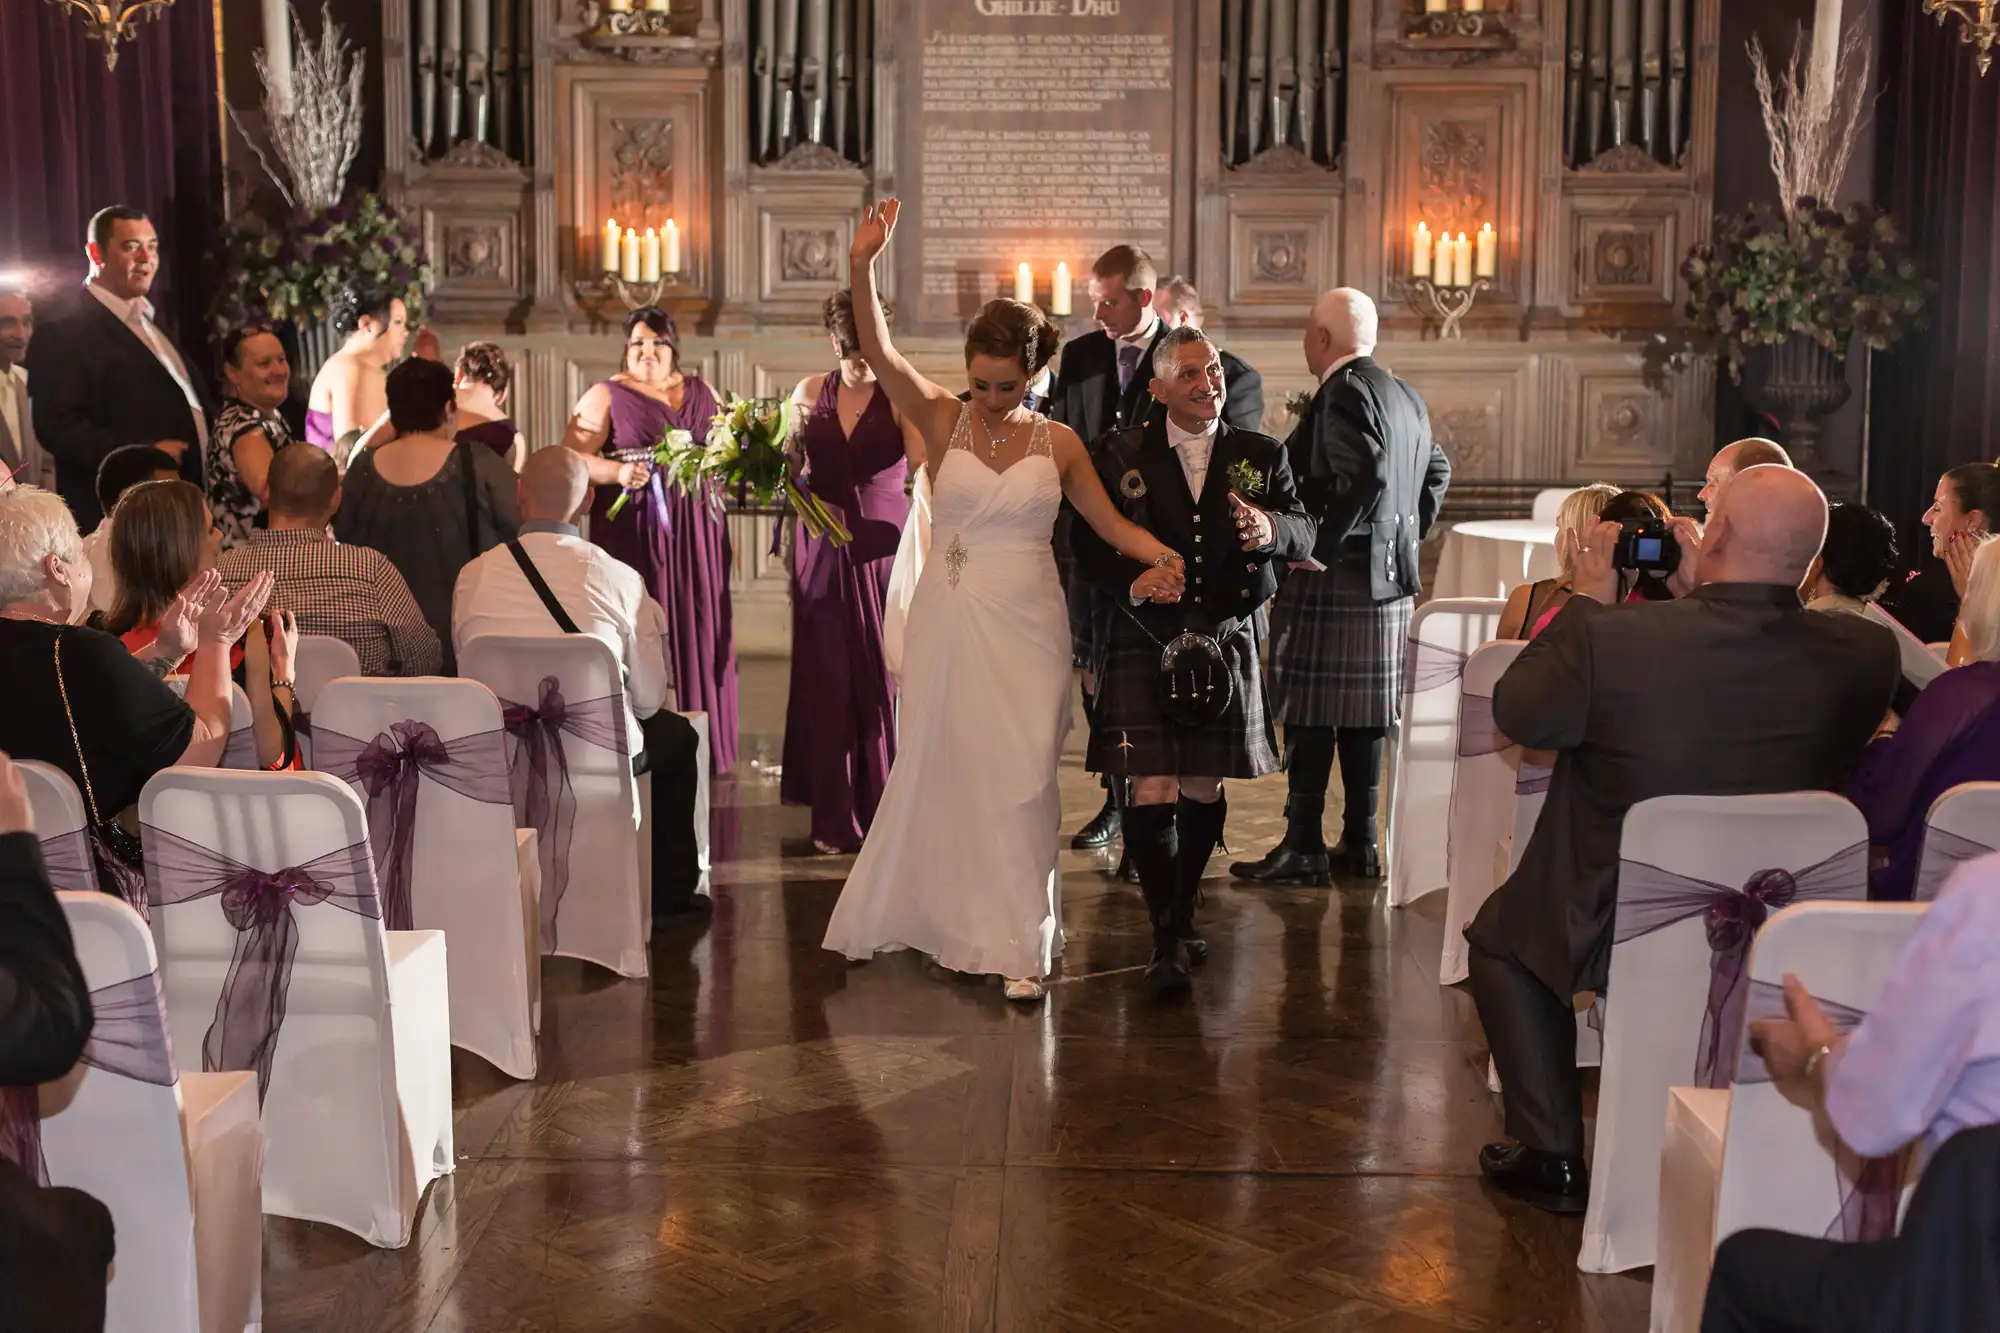 Bride and groom walking down the aisle, guests applauding, in a grand hall with elegant decor.